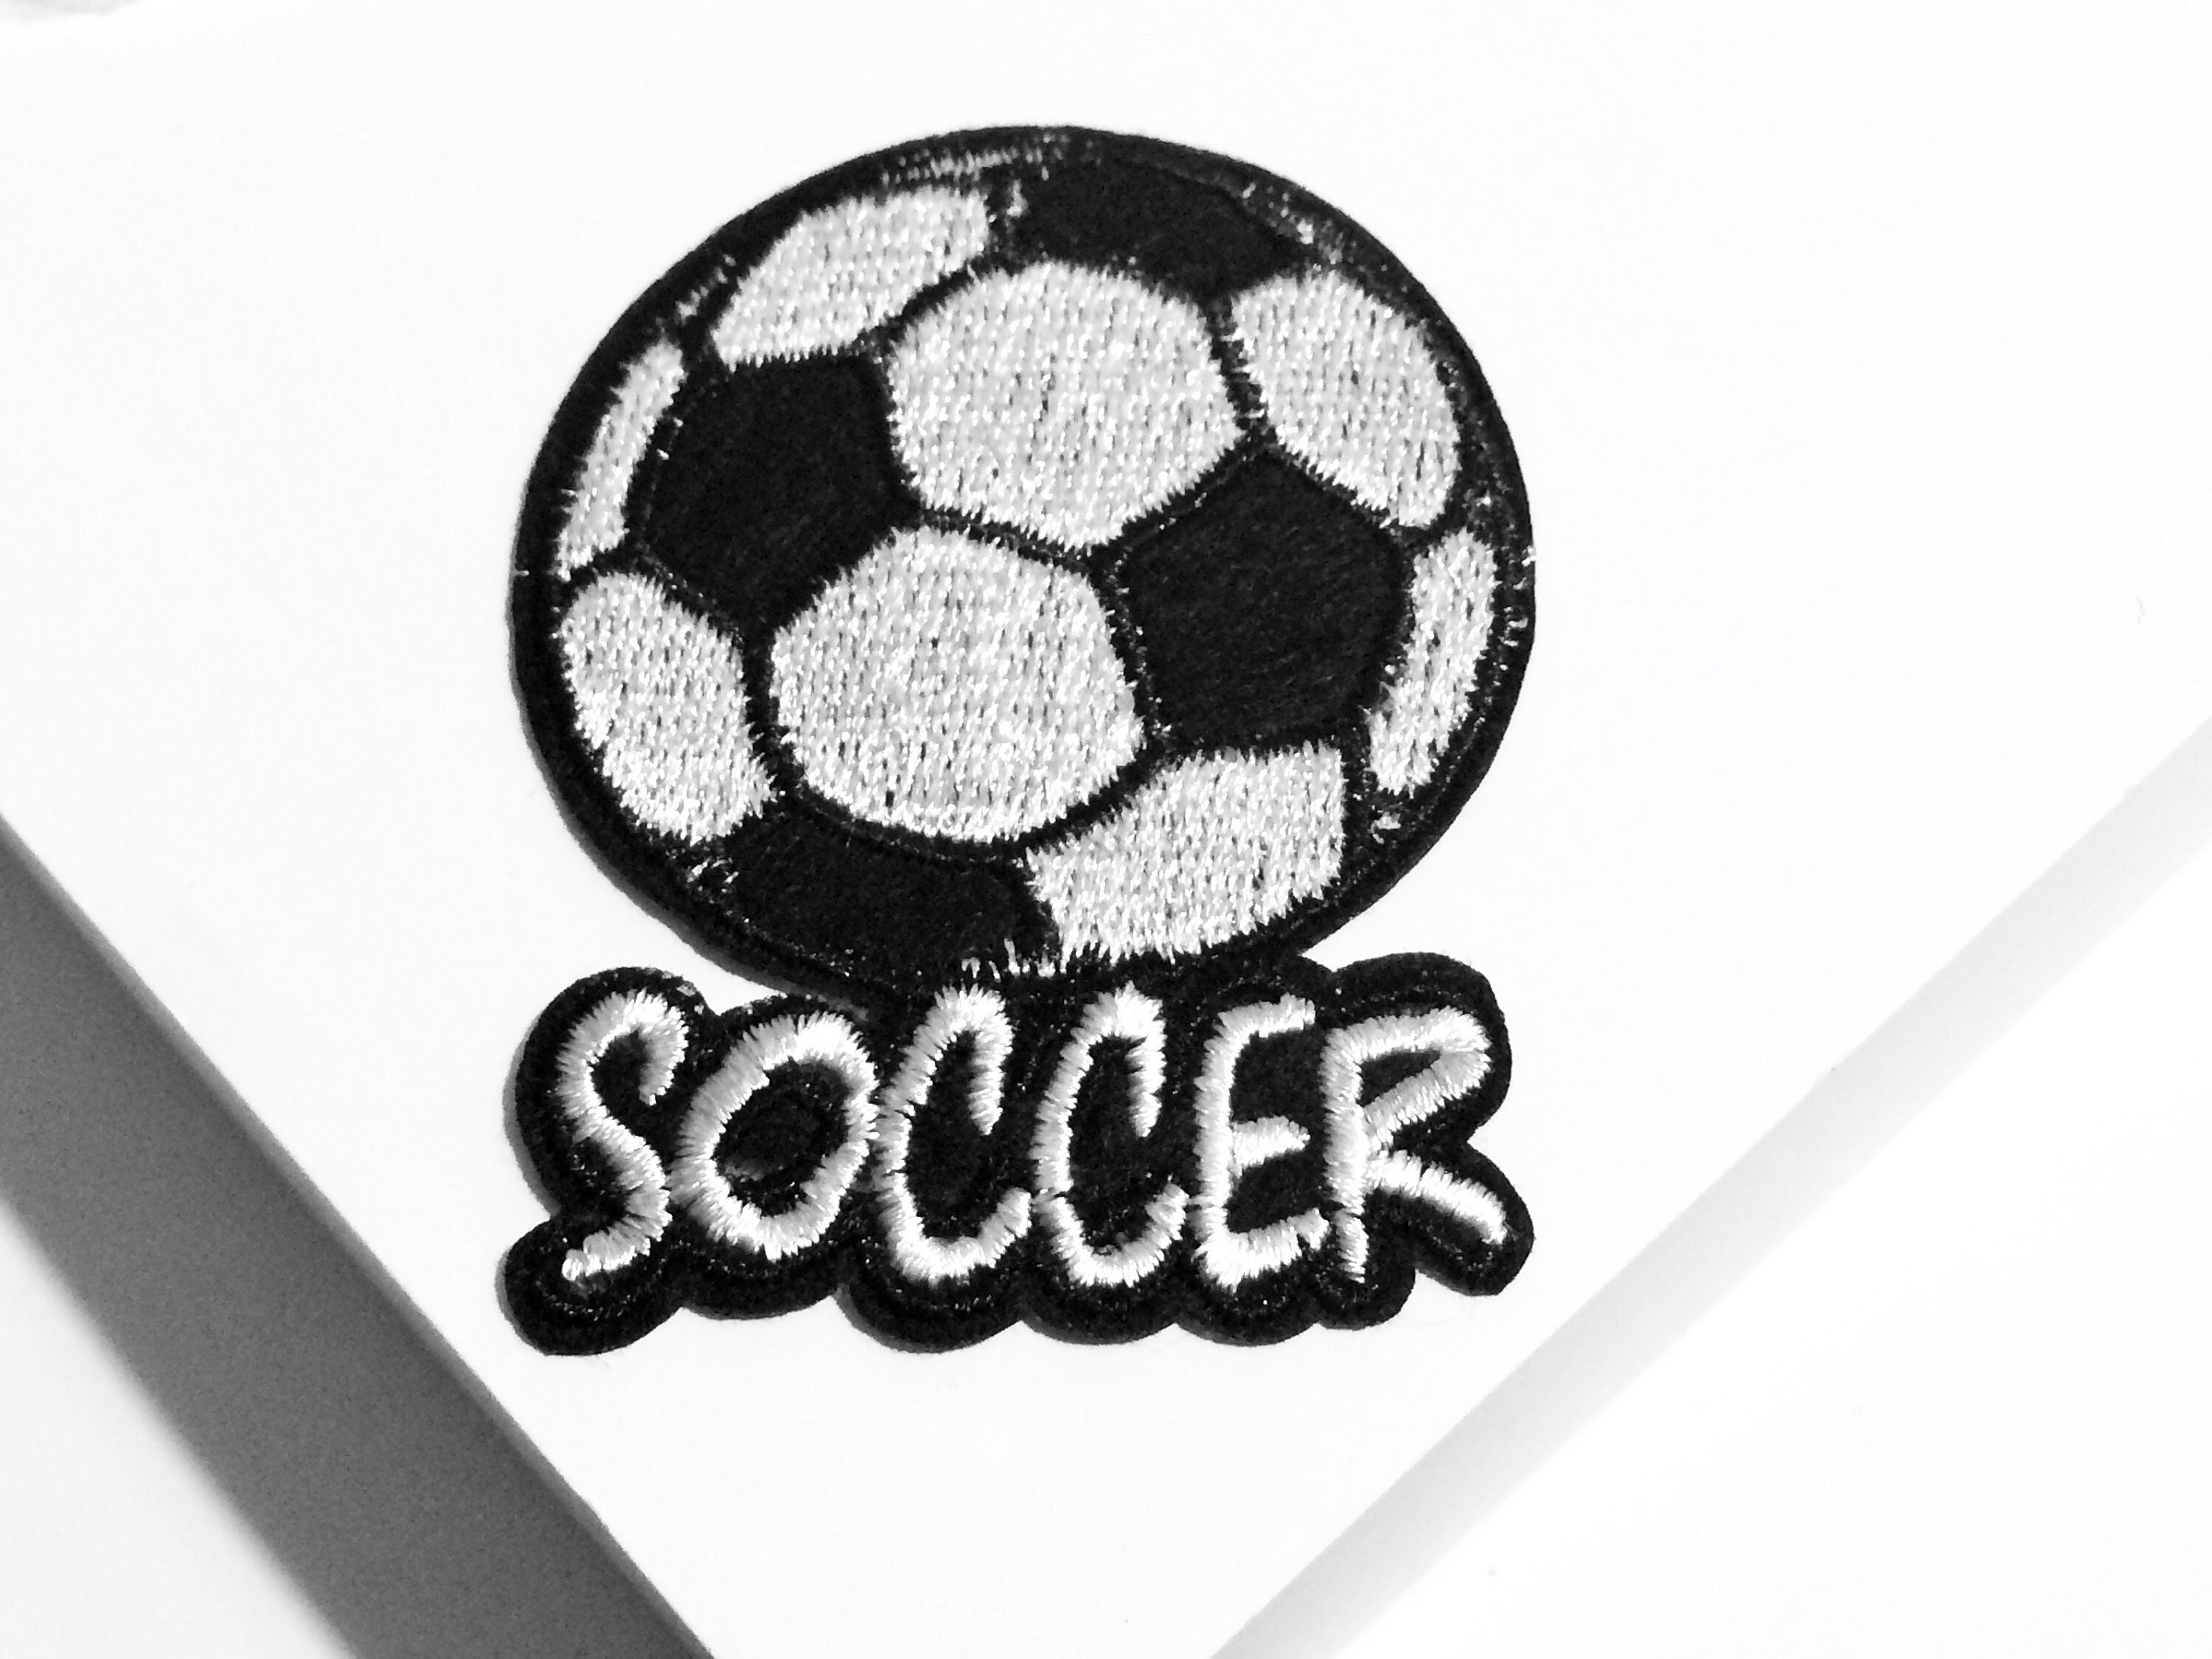 2 Football Iron on Patches, 5cm Soccer Ball Sew on Patch, Embroidered  Fabric Appliques, Embroidery Craft Supplies 